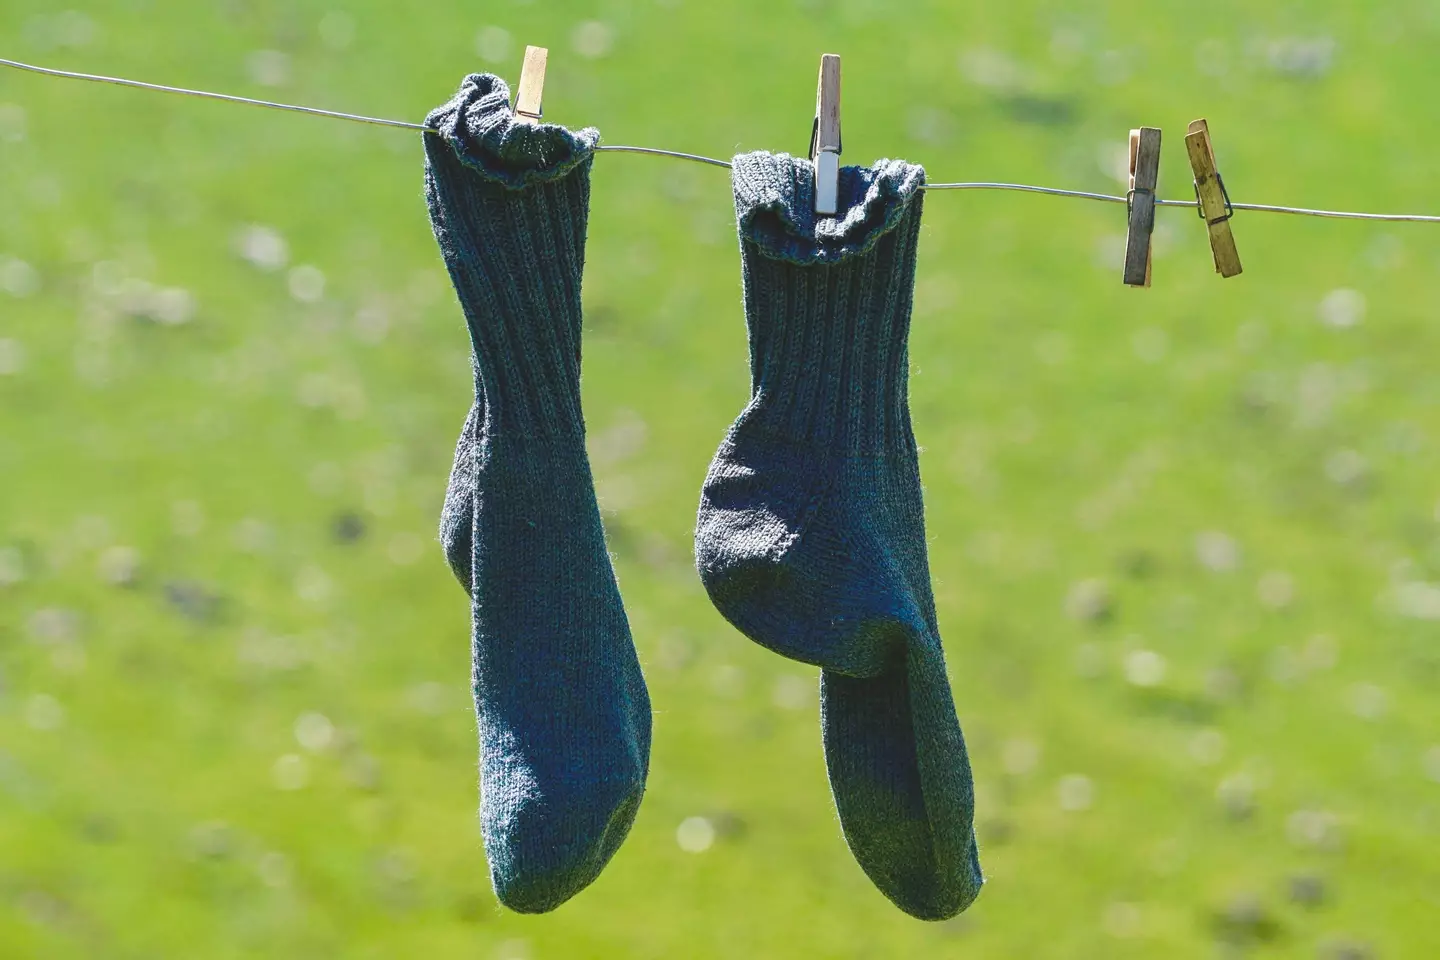 How else are you supposed to get your socks dry on a nice day?